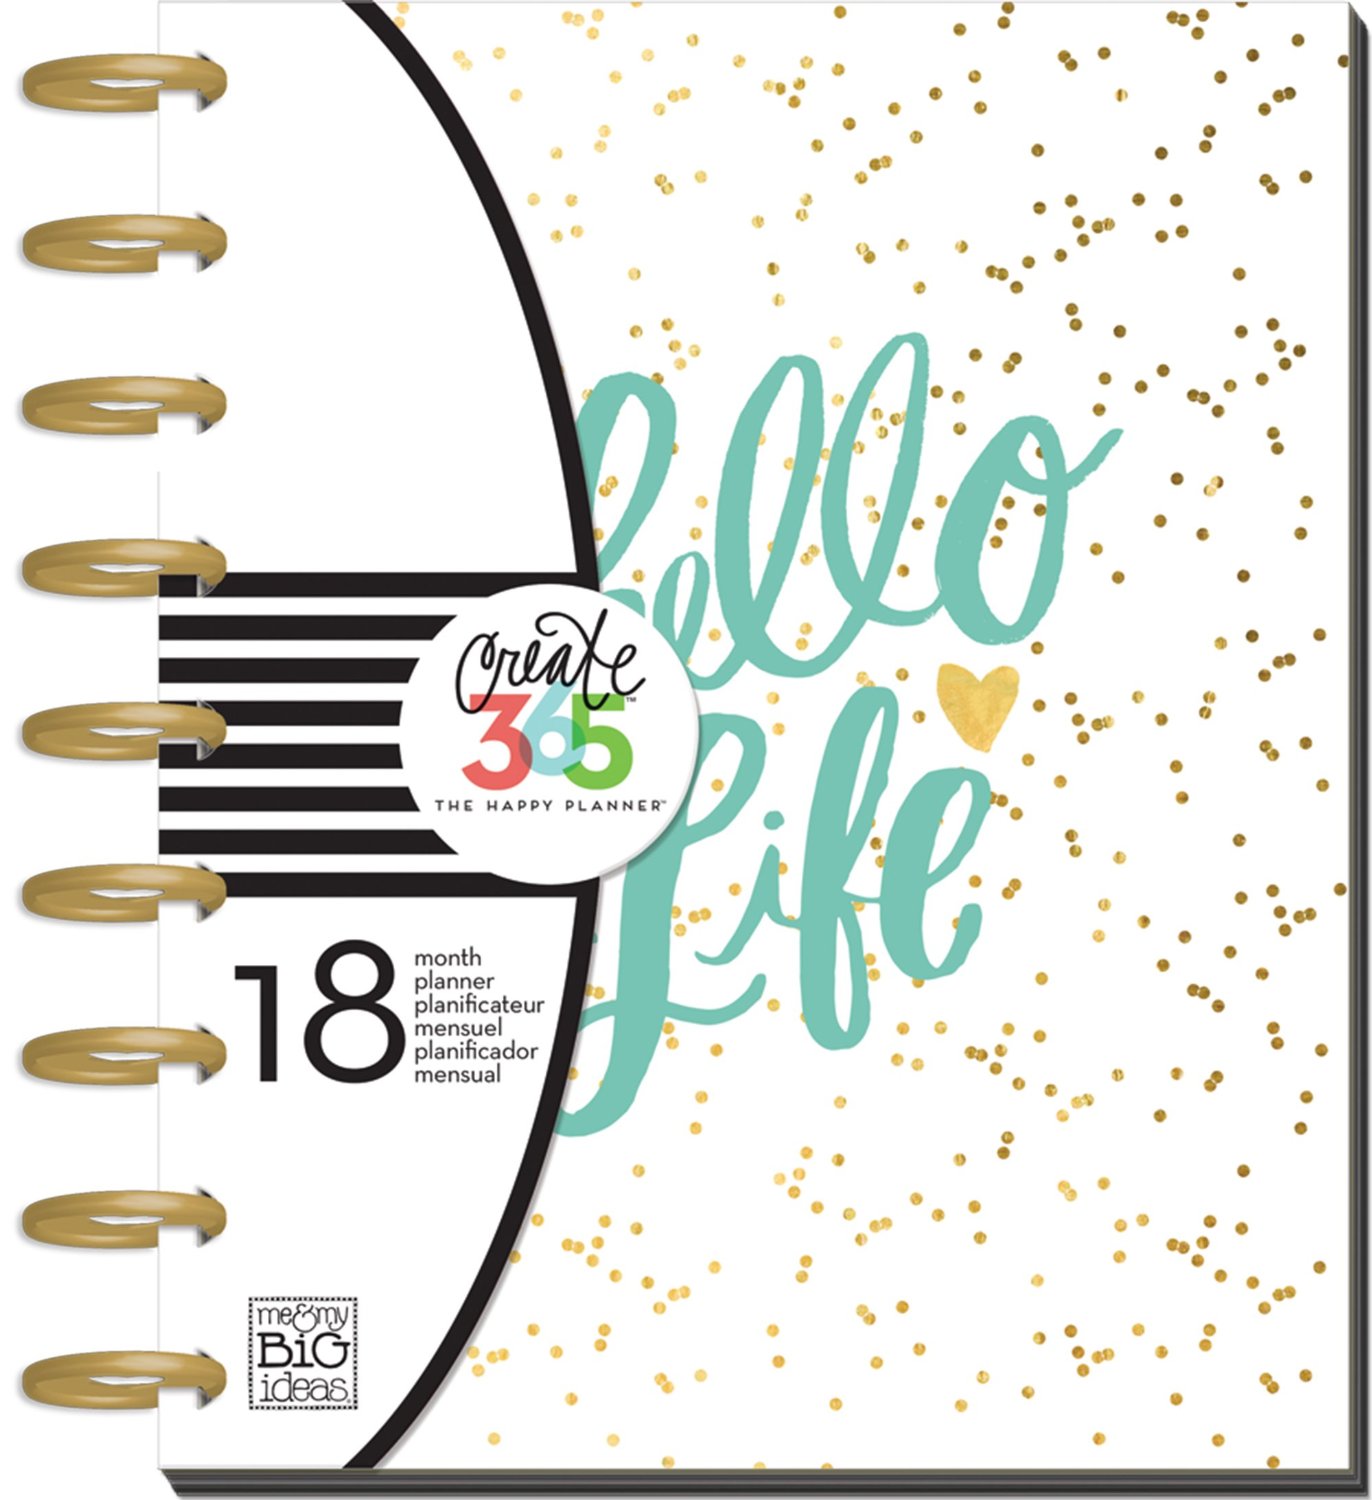 Finding the Perfect Planner For The New Year